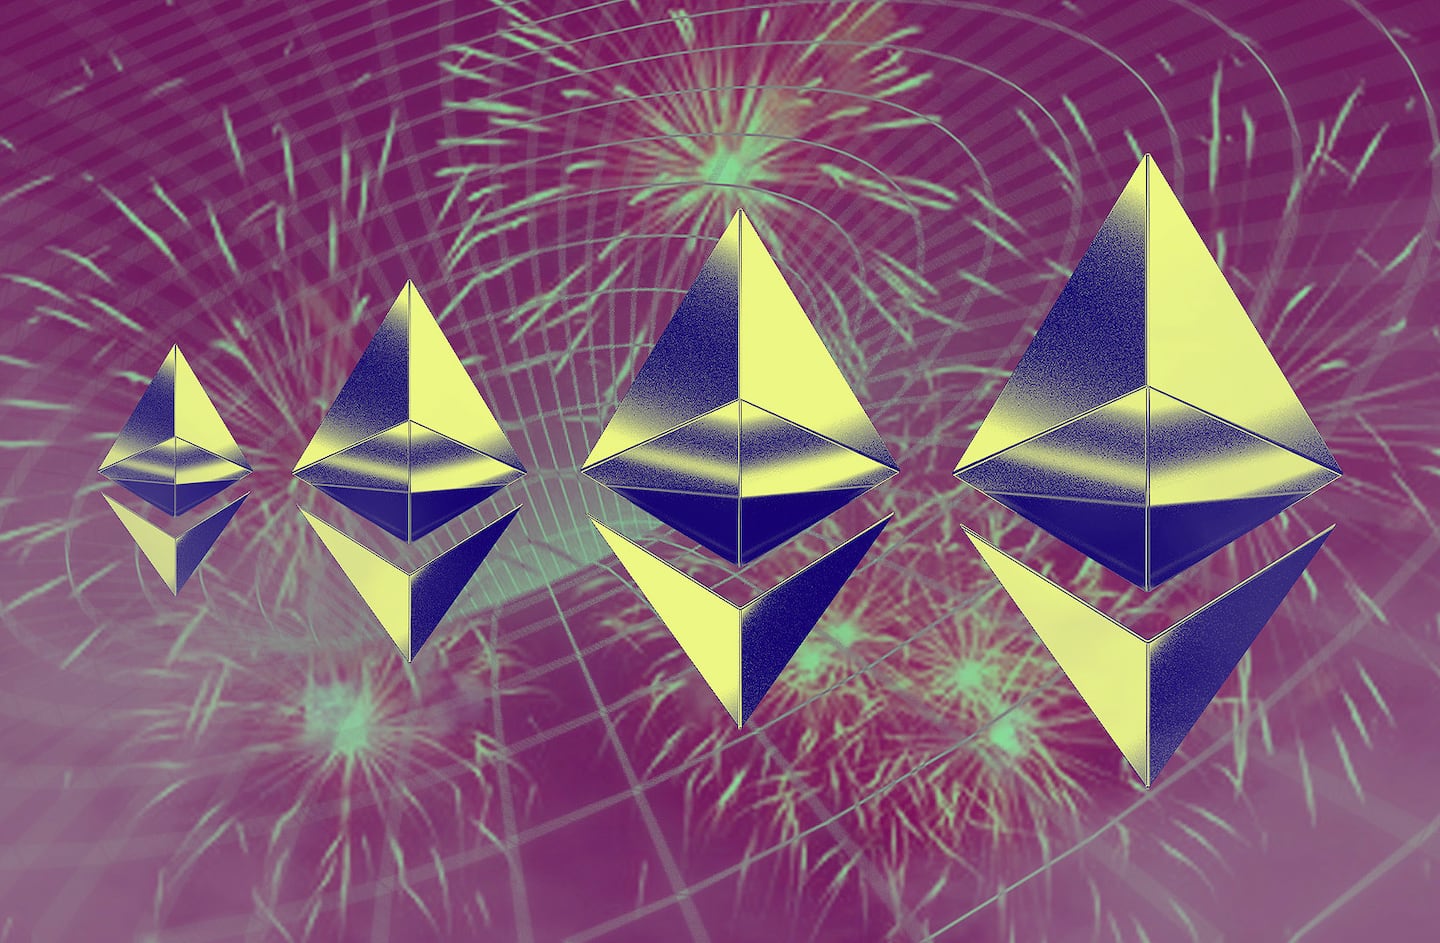 Portrait of Ethereum logos going from small to big, with superimposed fireworks over a background of a wormhole structure.